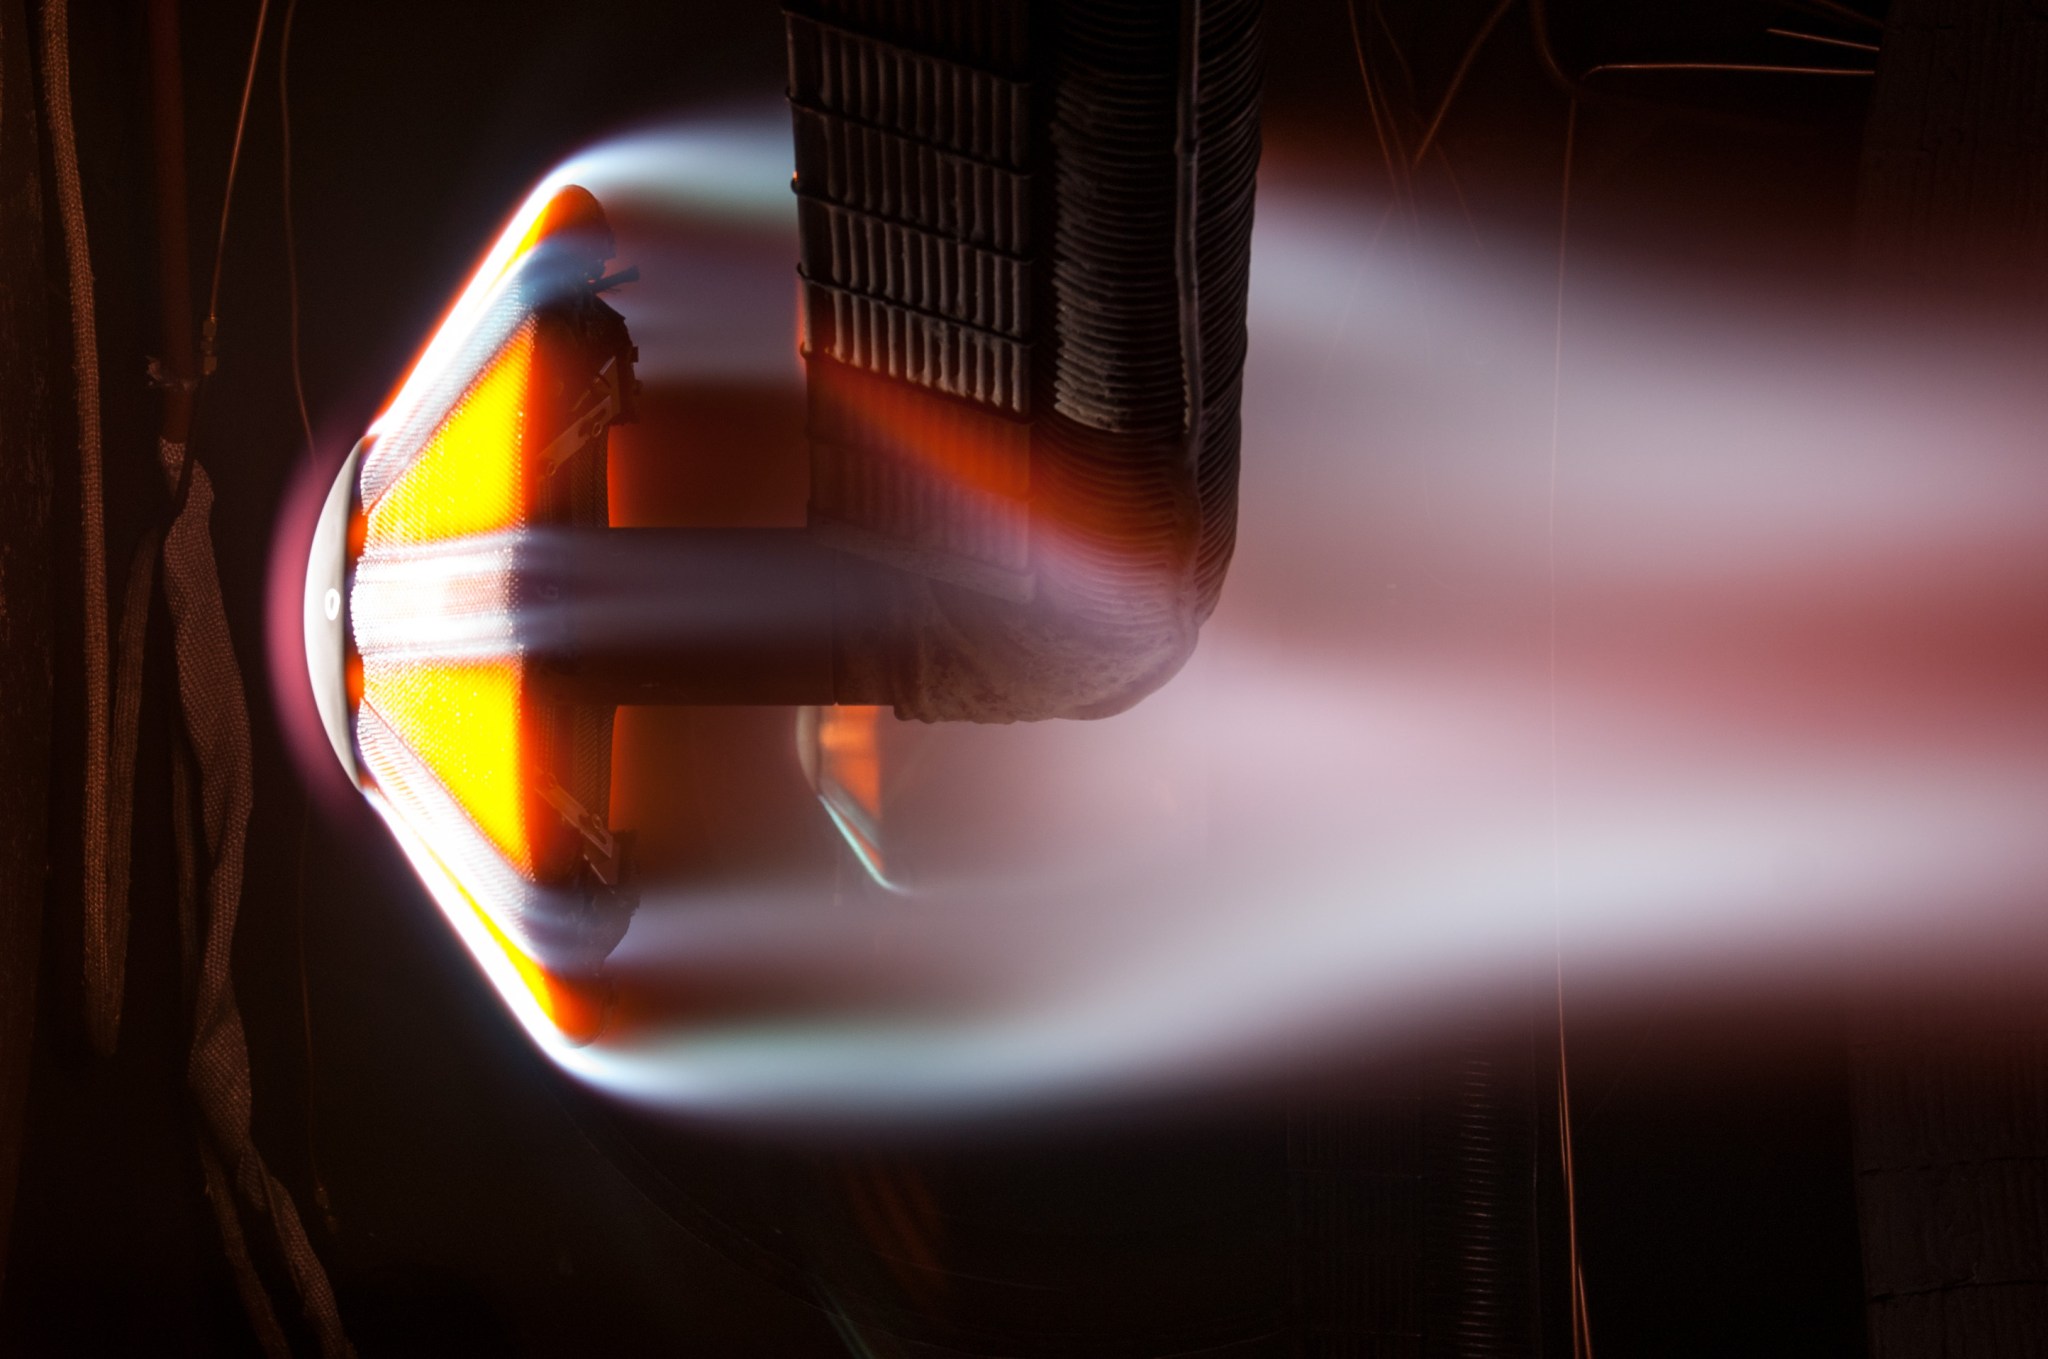 This image is from the Interactive Heating Facility ArcJet and shows the flow of extremely heated air exiting the 21-inch diameter nozzle from the left, causing a bow shock to form in front of the ADEPT test article.